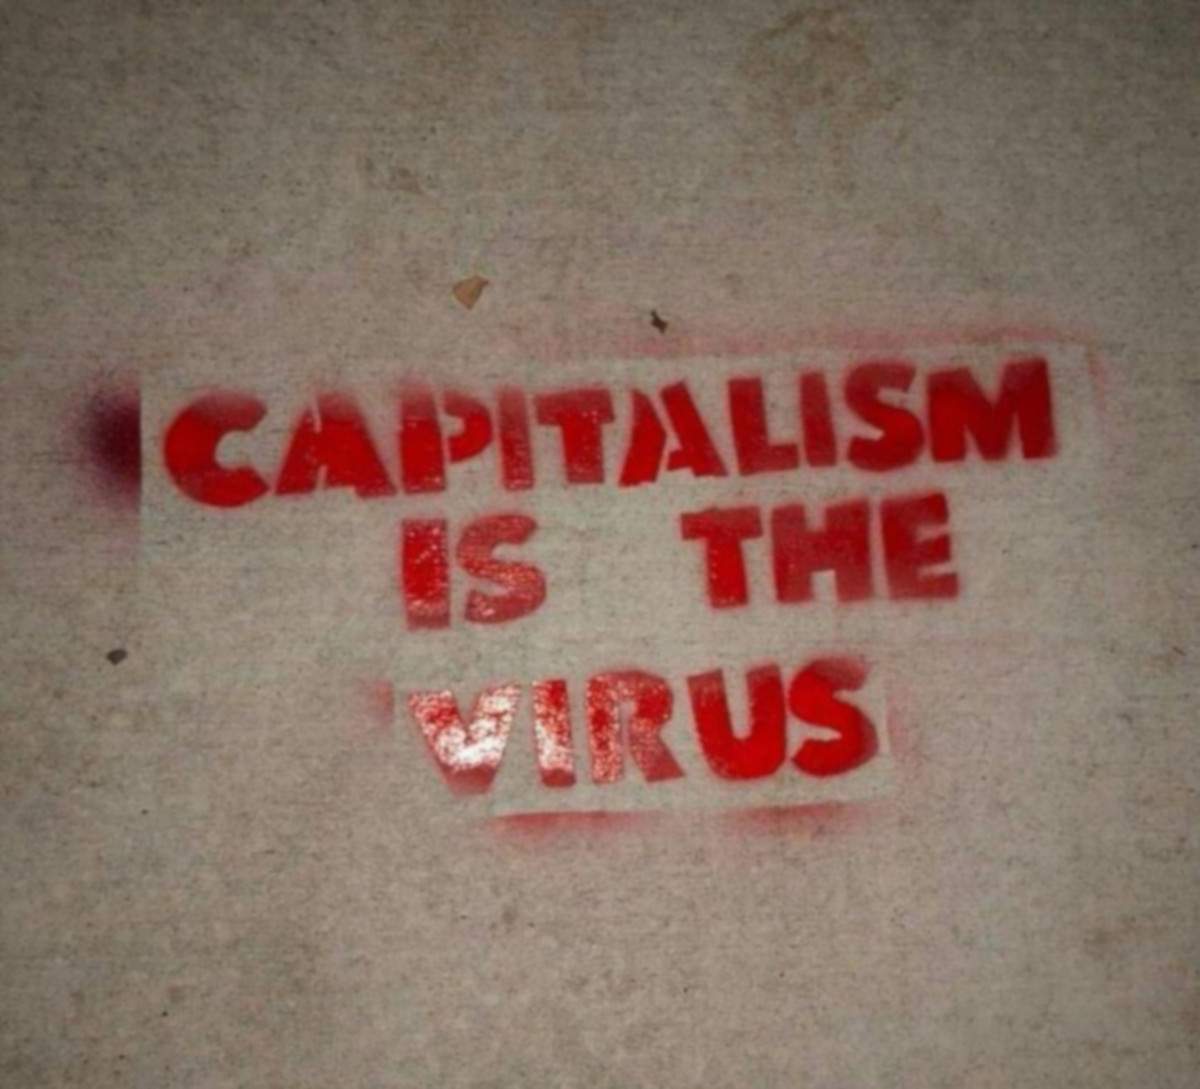 2020 The Virus Is Capitalism: Extract